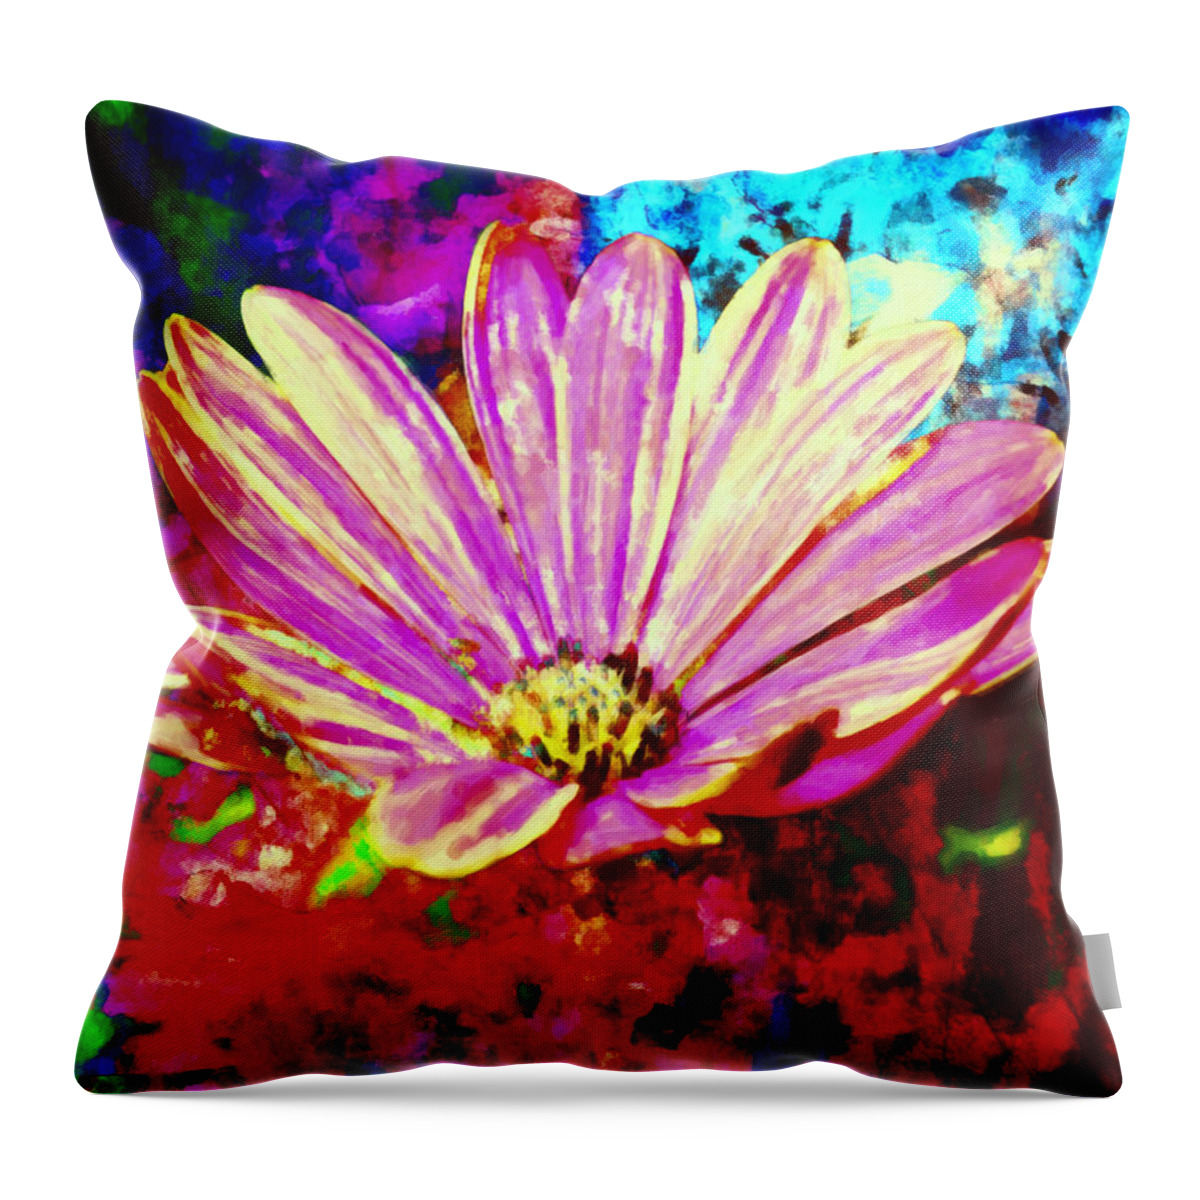 Www.themidnightstreets.net Throw Pillow featuring the painting Do It All Over Again by Joe Misrasi